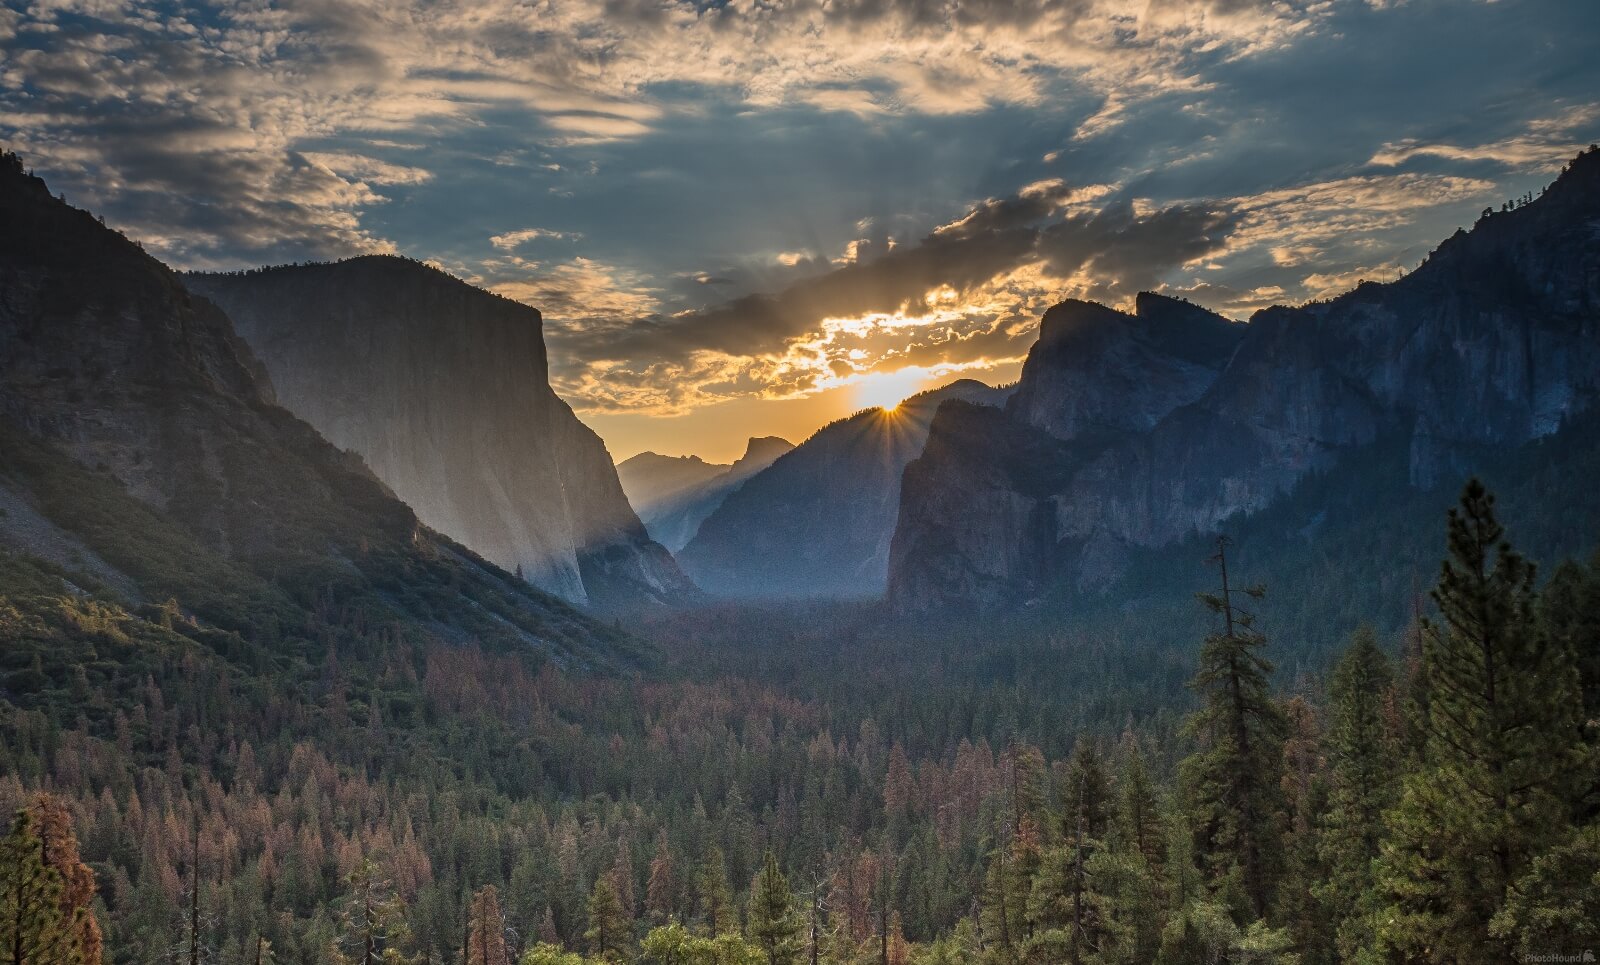 Image of Yosemite Valley (Tunnel View) by Oliver Sherratt